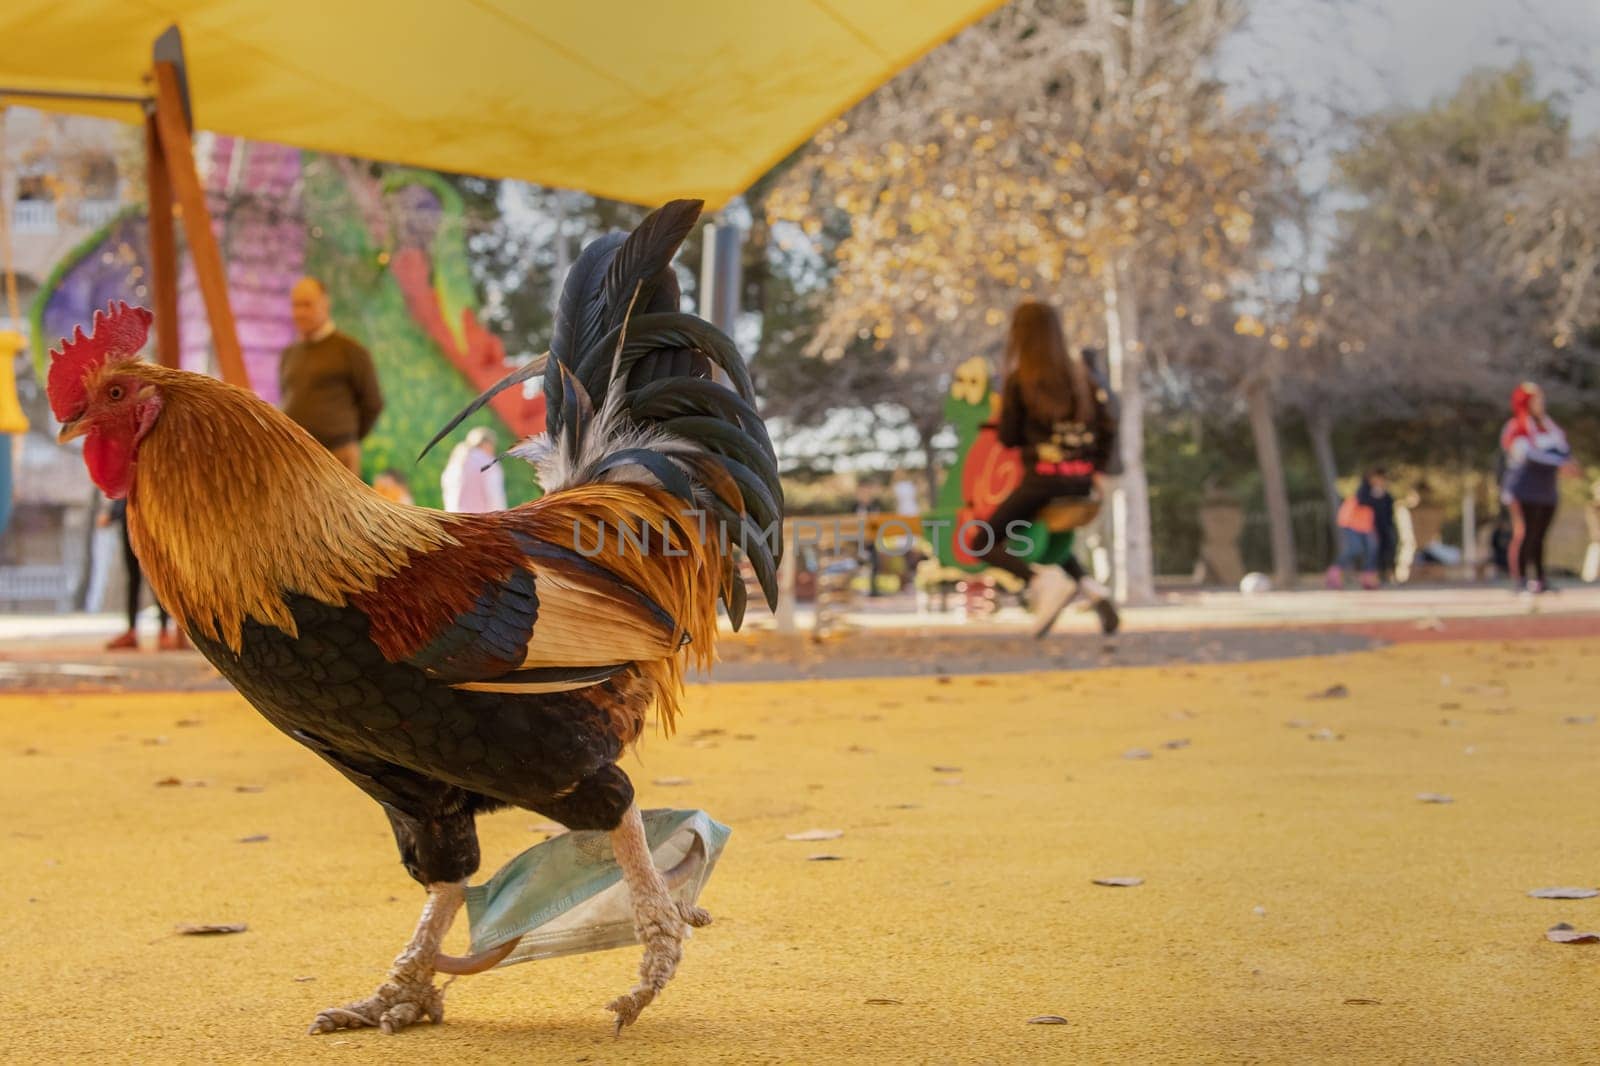 rooster walks through the park on the playground the close-up on the puttuha by PopOff